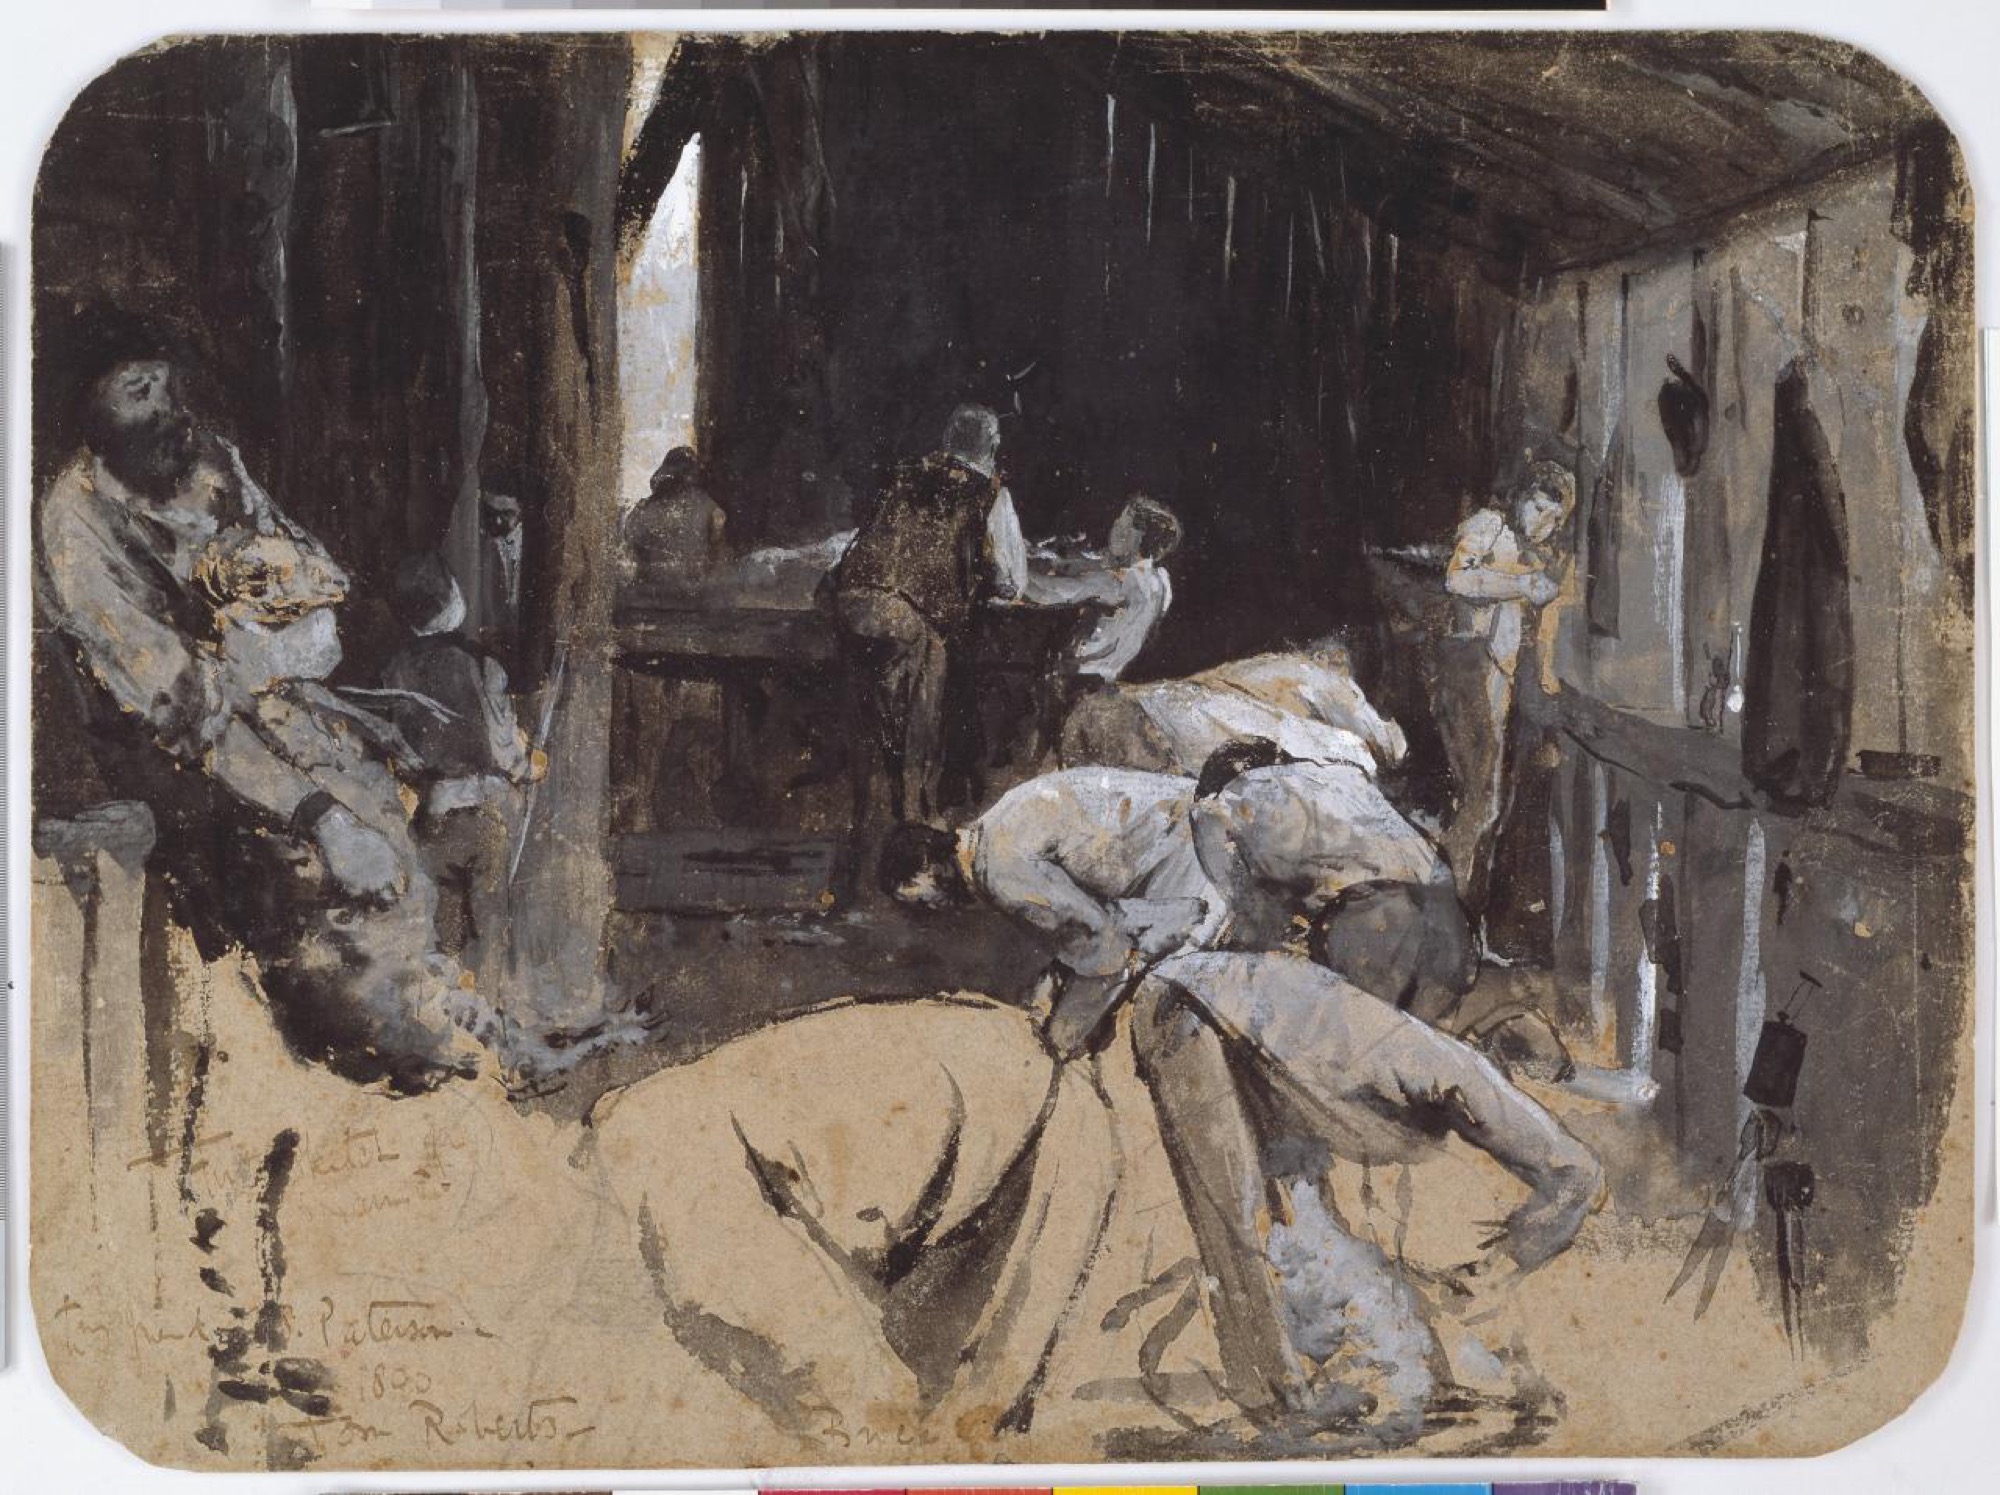 Tom Roberts, <em>First sketch of Shearing the rams</em> (1888), gouache and pencil on brown paper on cardboard, 22.0 x 29.9 cm, National Gallery of Victoria, Purchased 1974.